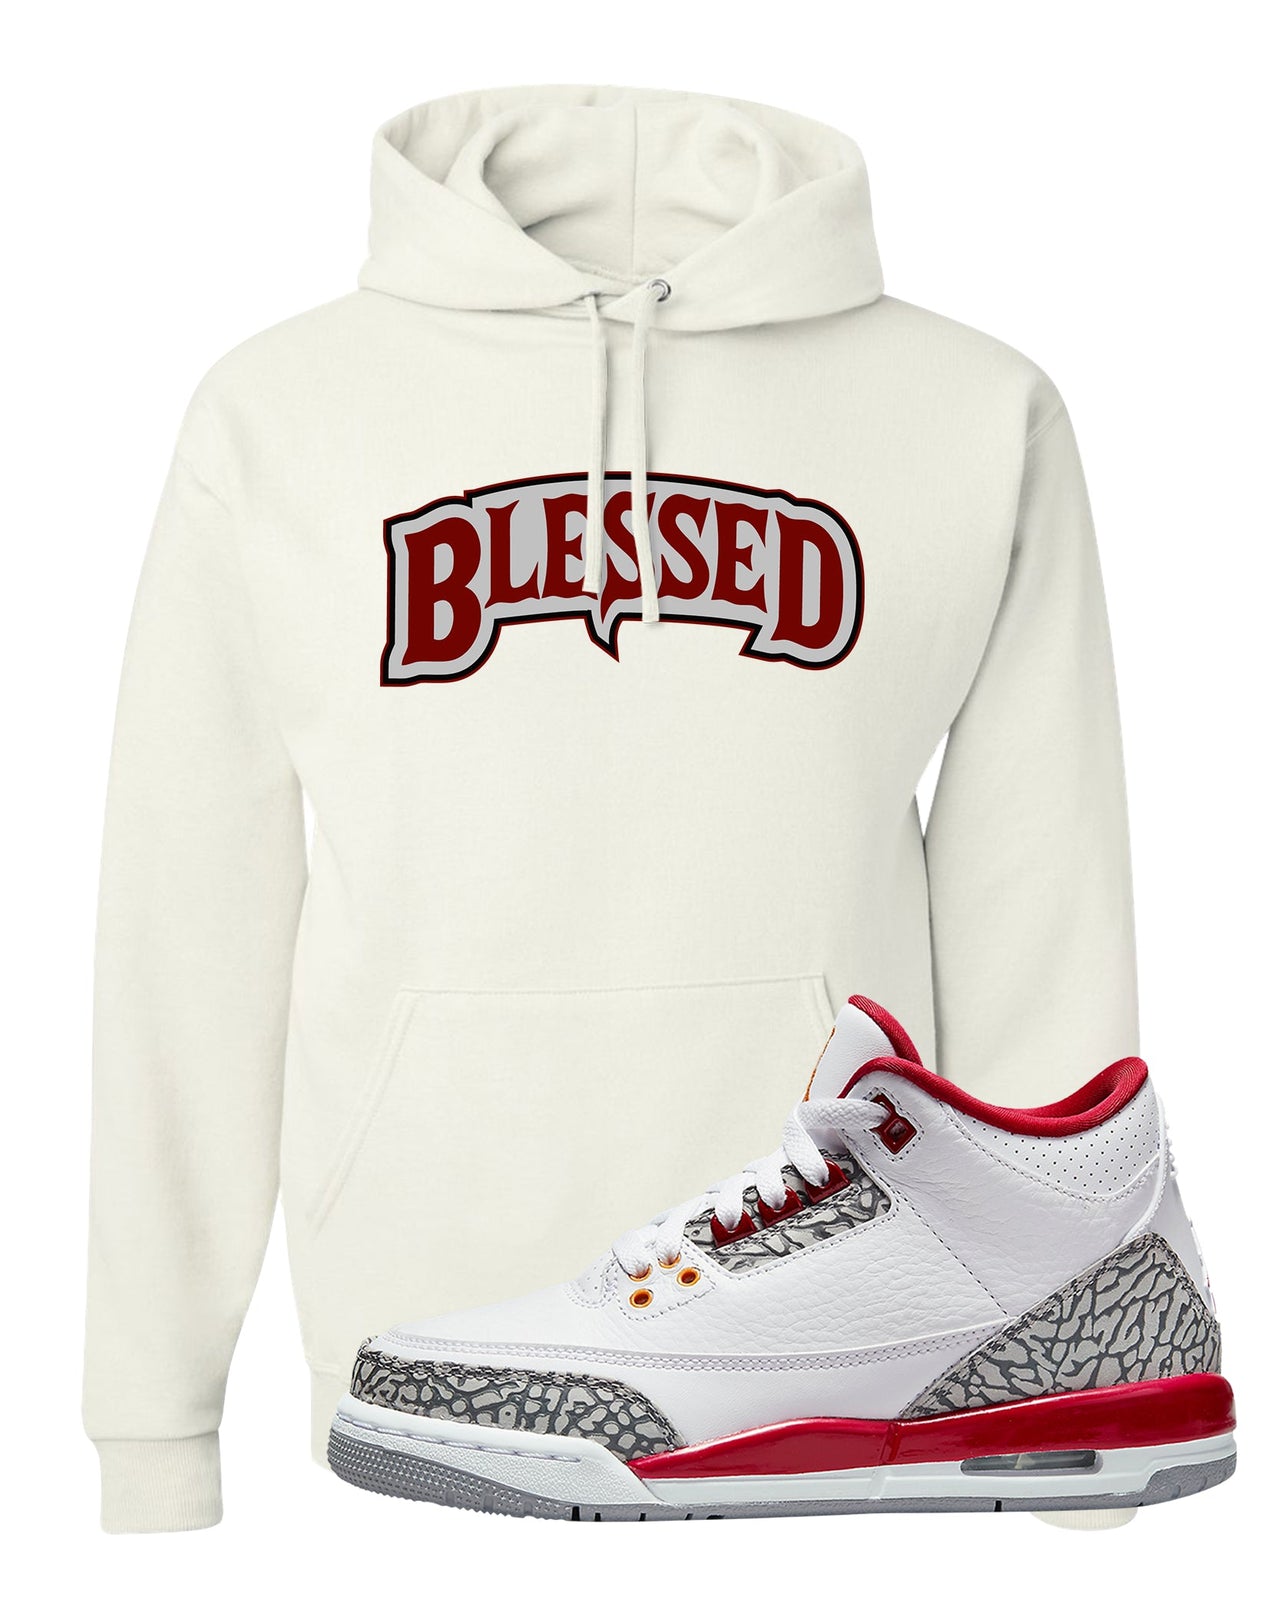 Cardinal Red 3s Hoodie | Blessed Arch, White